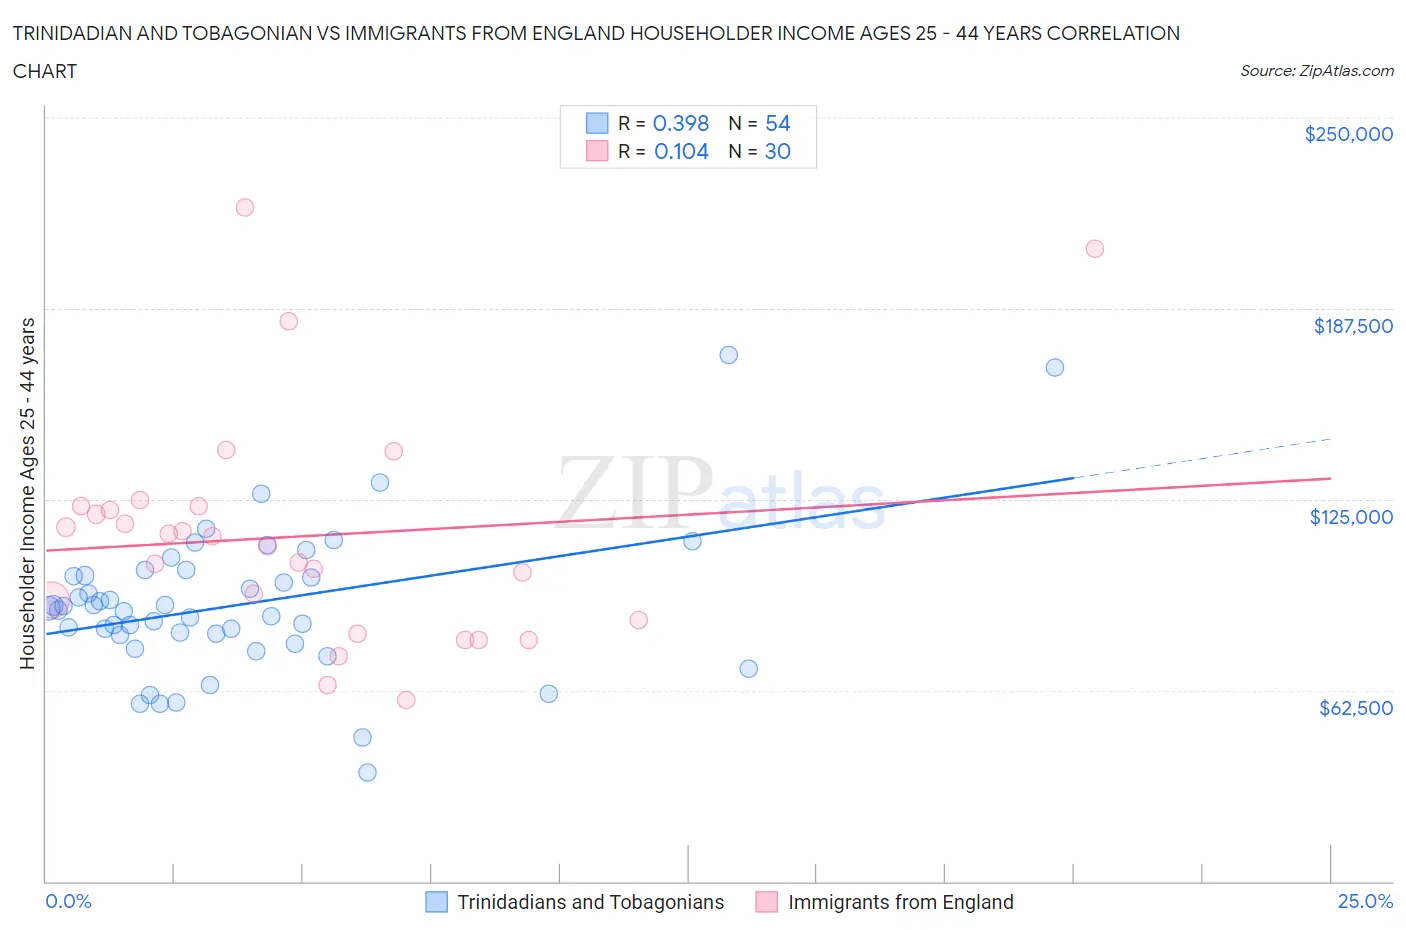 Trinidadian and Tobagonian vs Immigrants from England Householder Income Ages 25 - 44 years